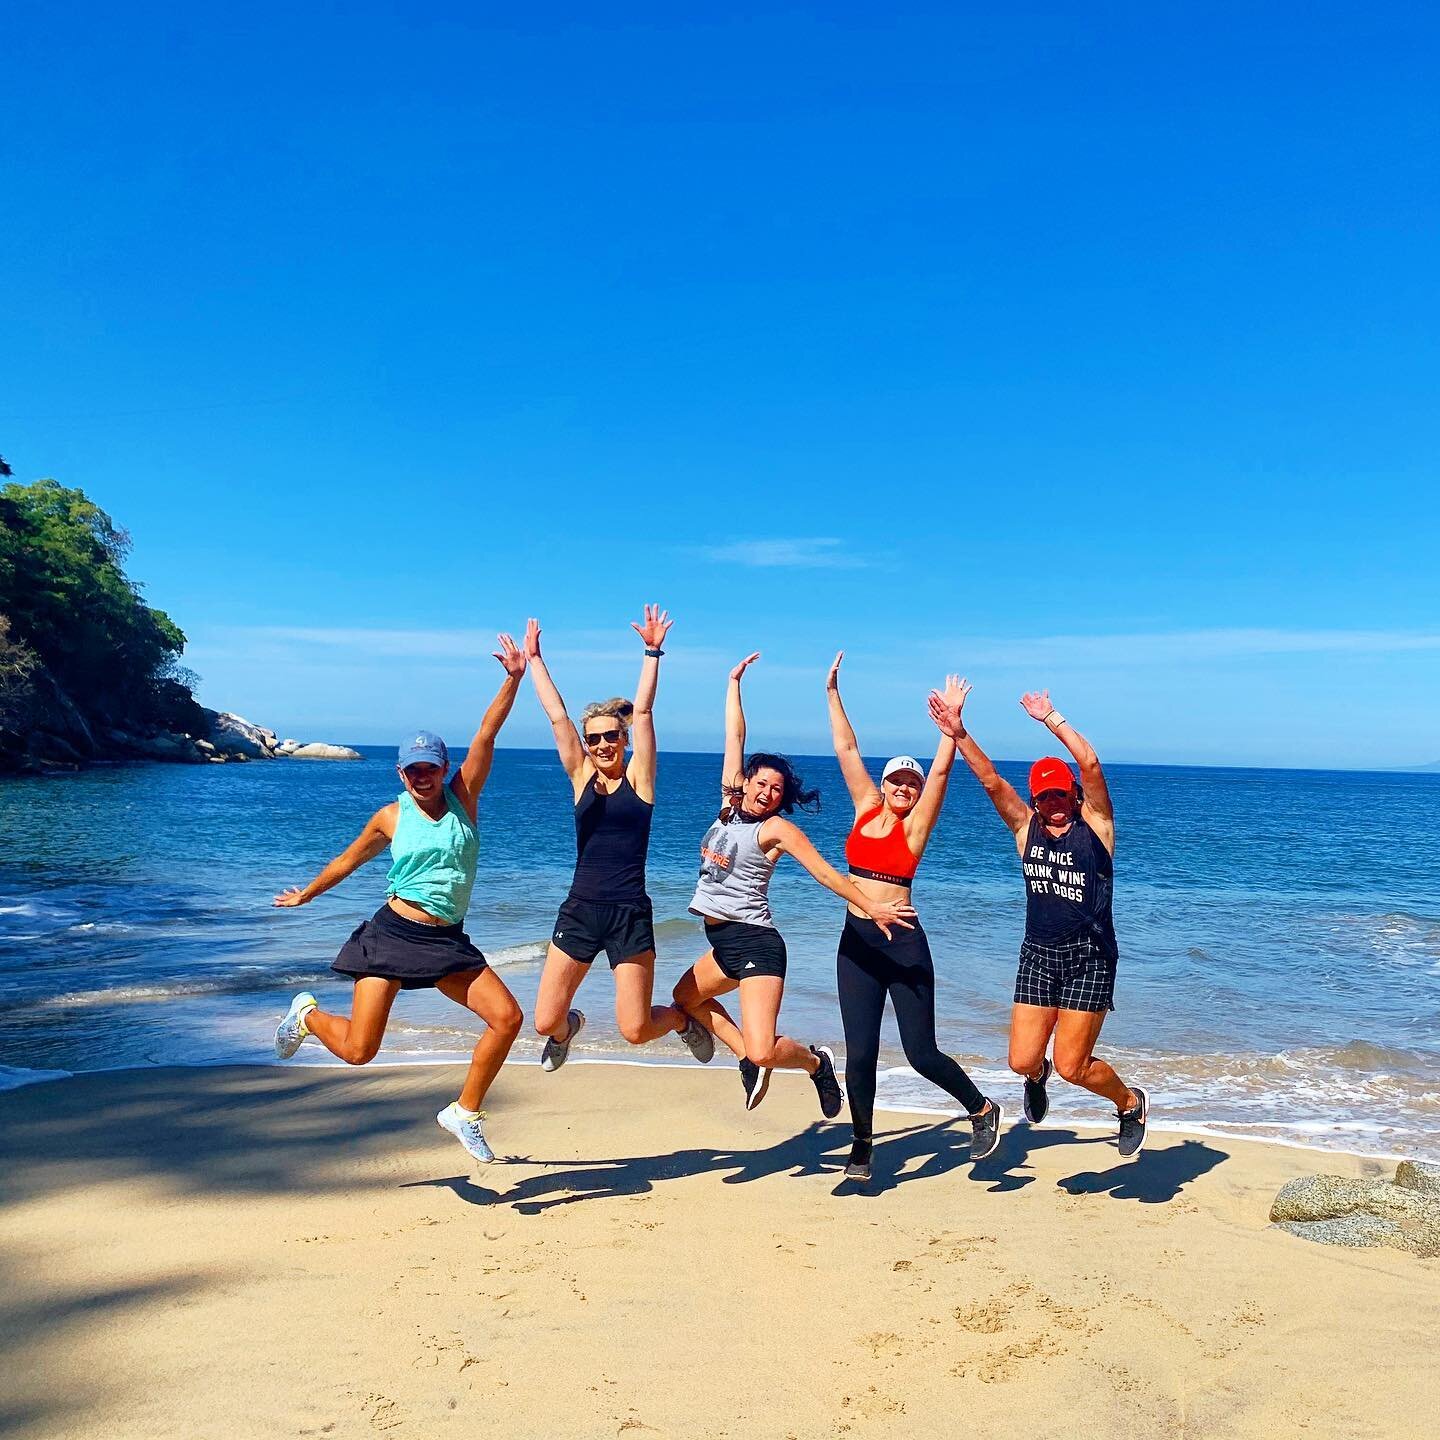 🌺 Girls just wanna have fun 🌺

Contact us now to book your Jungle Coastline Waterfall Hike in Puerto Vallarta, Mexico 🇲🇽 

www.pvactivities.com 

#puertovallarta #ptovallarta #welovepv #vallarta #vallartaadventures #puertovallartavibes #puertoval